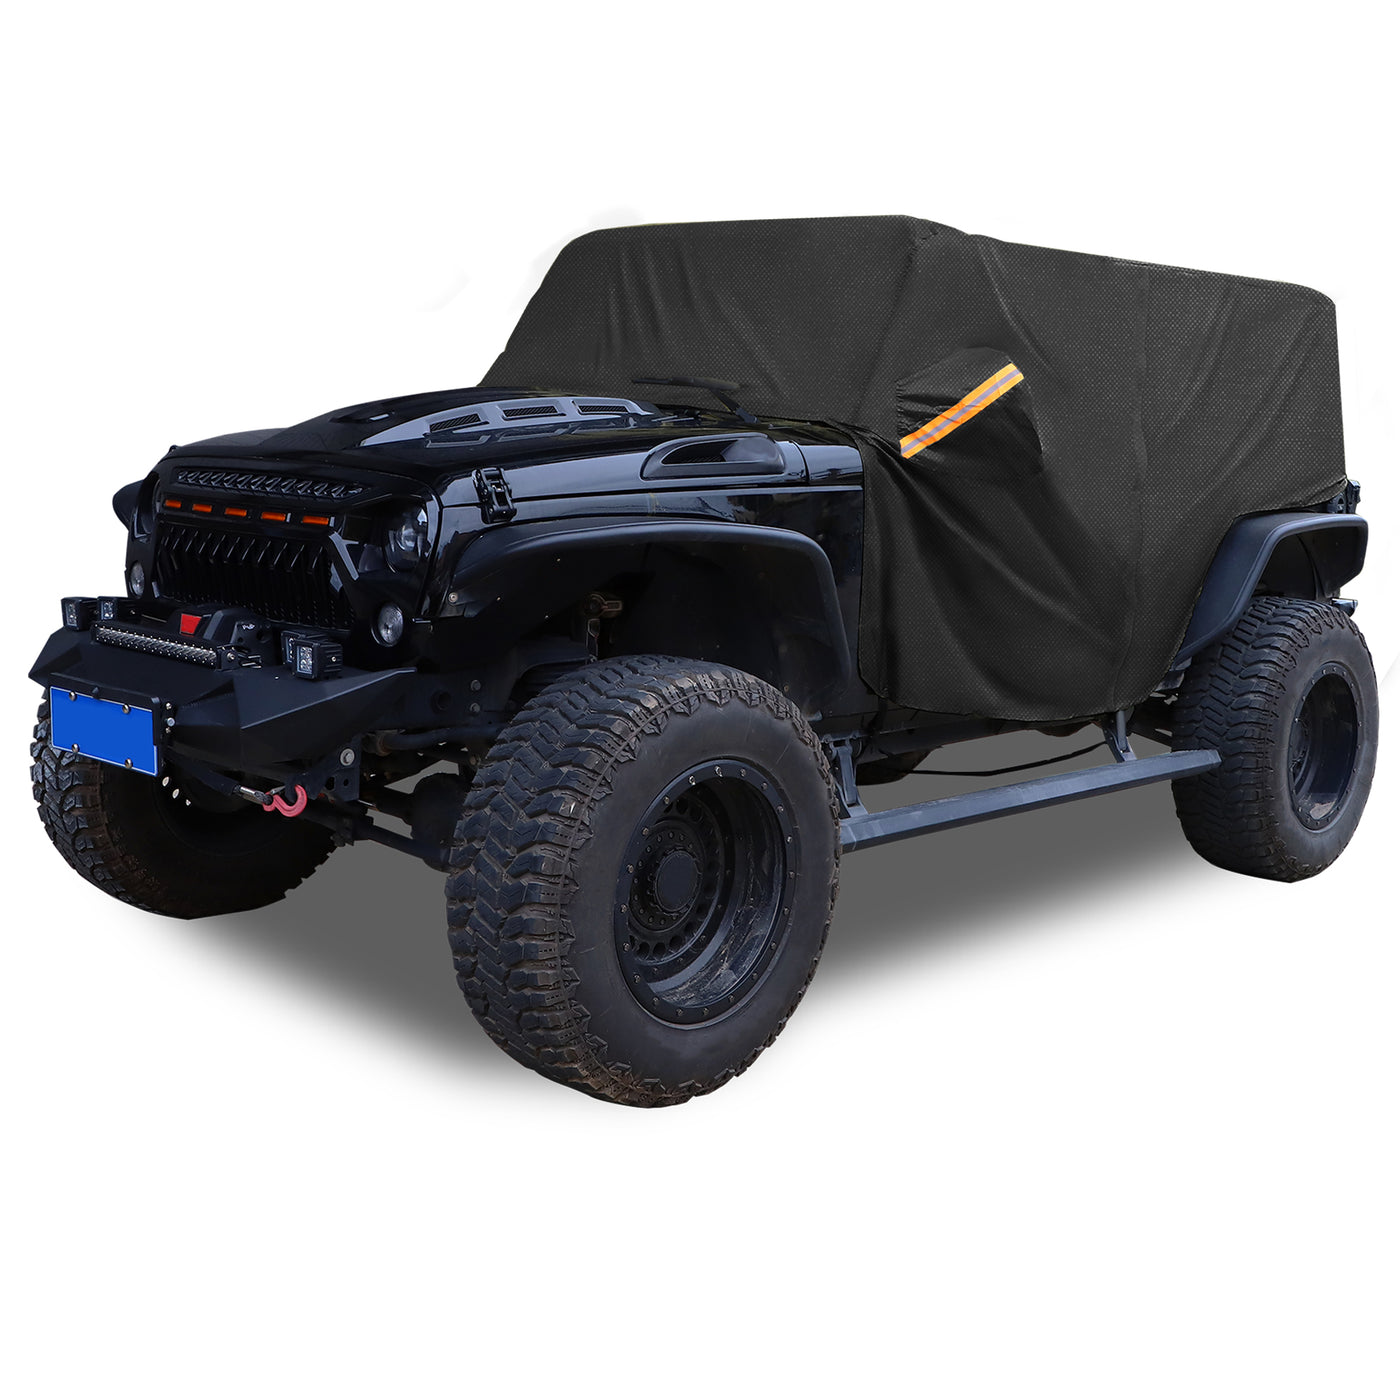 X AUTOHAUX SUV Car Cover Cab Cover Fit for Jeep Wrangler JK JL Hardtop 2 Door 2007-2021 Outdoor Sun Dust Wind Snow Protection 210D Oxford with Driver Door Zipper